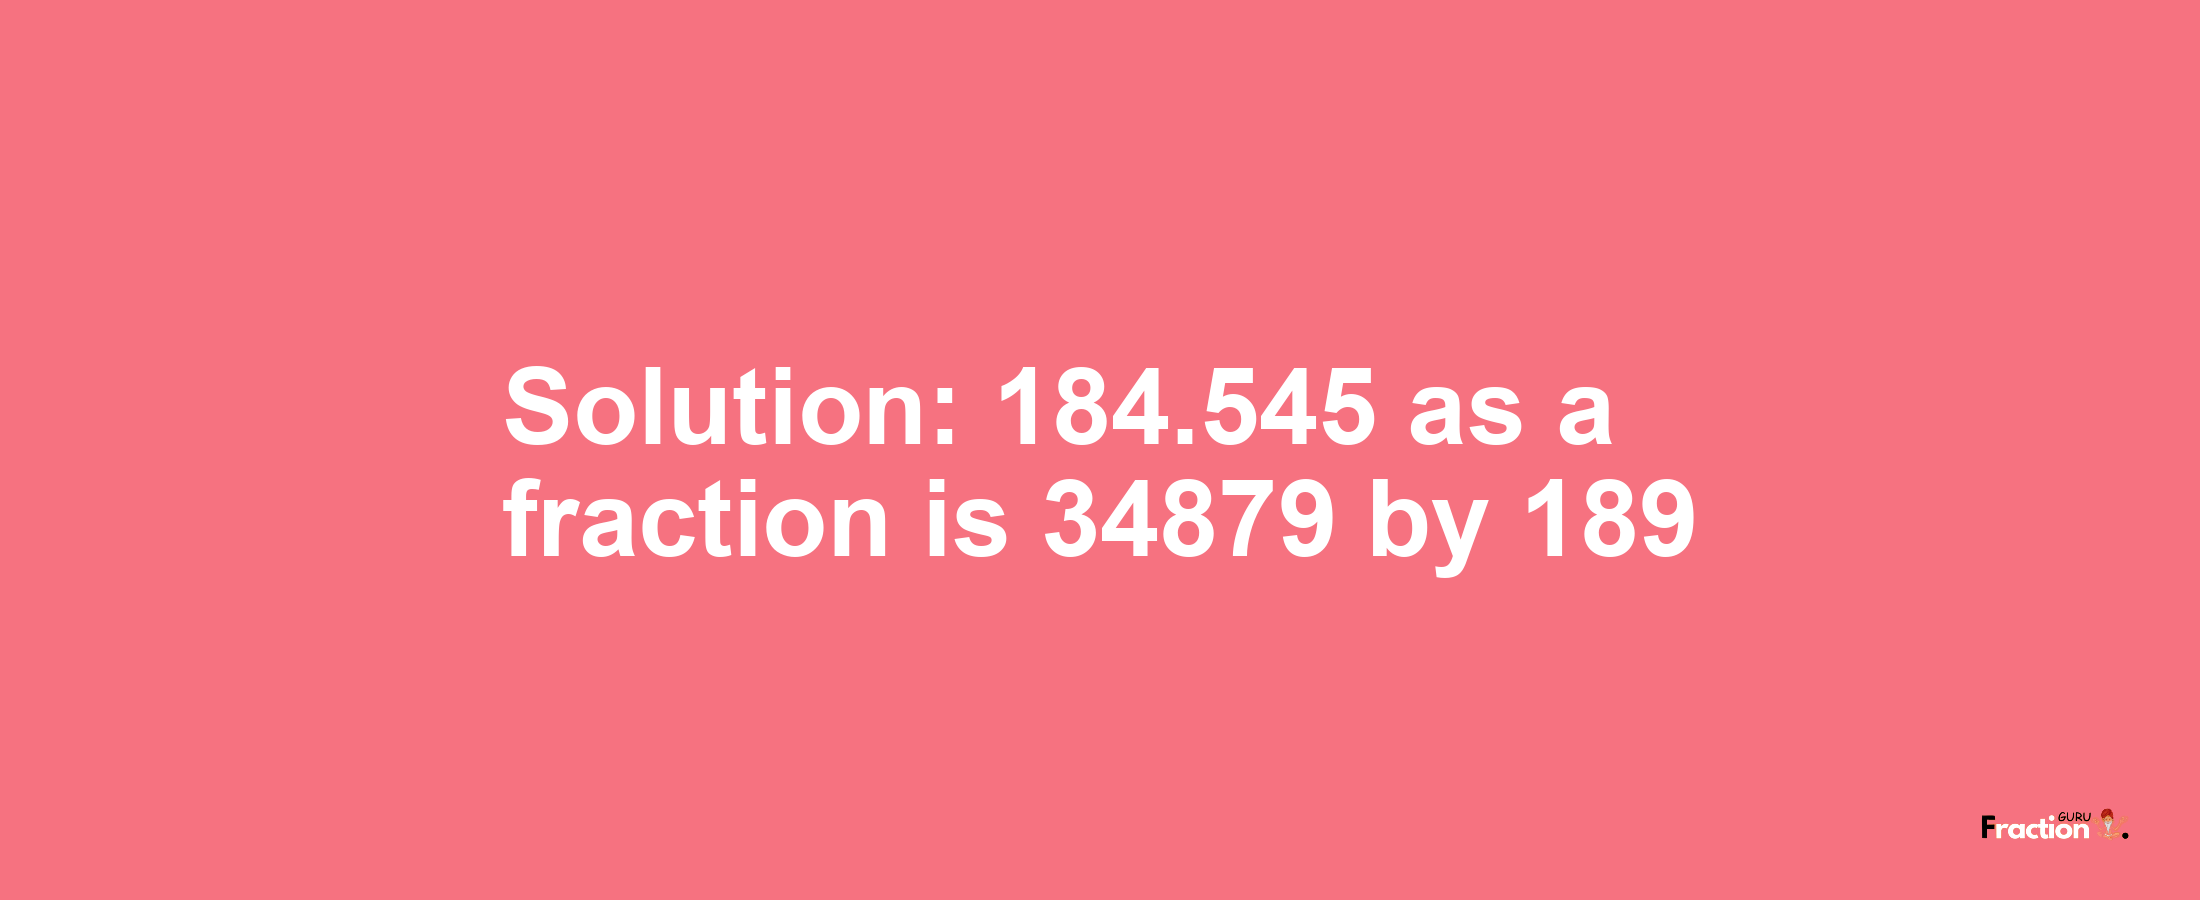 Solution:184.545 as a fraction is 34879/189